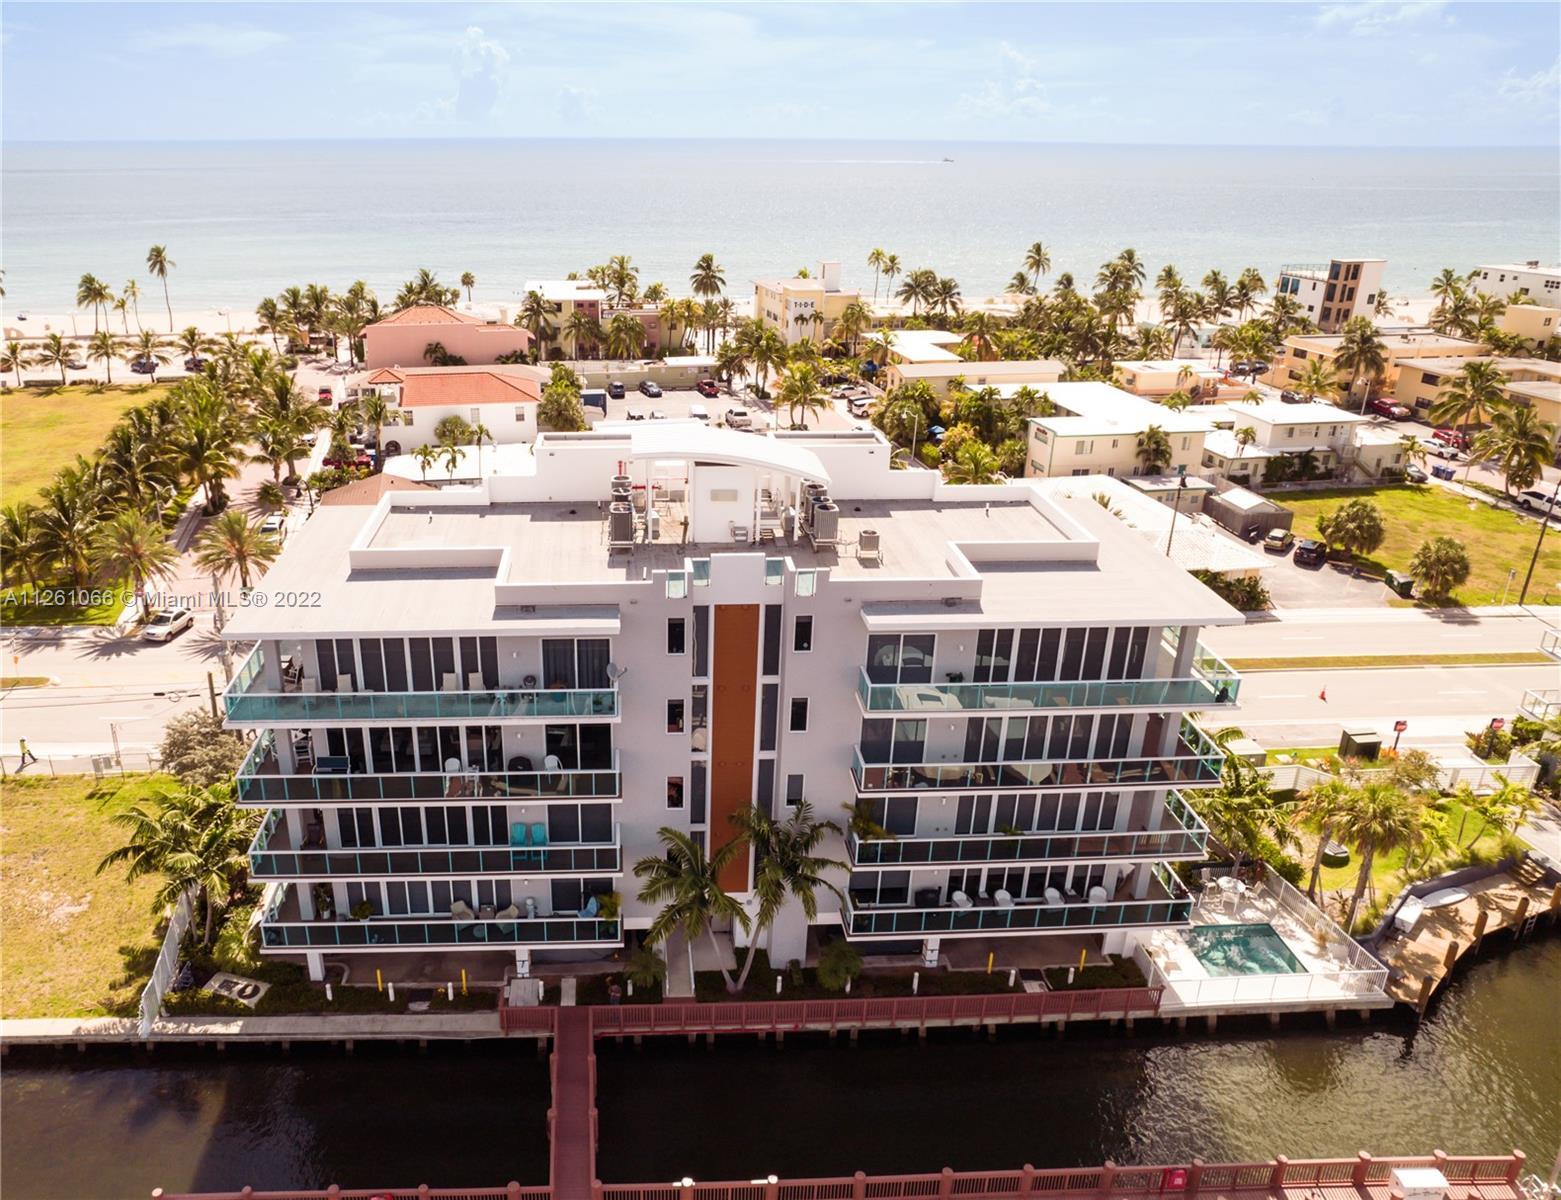 LUXURY WATERFRONT CONDO WITH 60' BOAT SLIP LOCATED IN THE HEART OF HOLLYWOOD BEACH. Sky Harbor is an